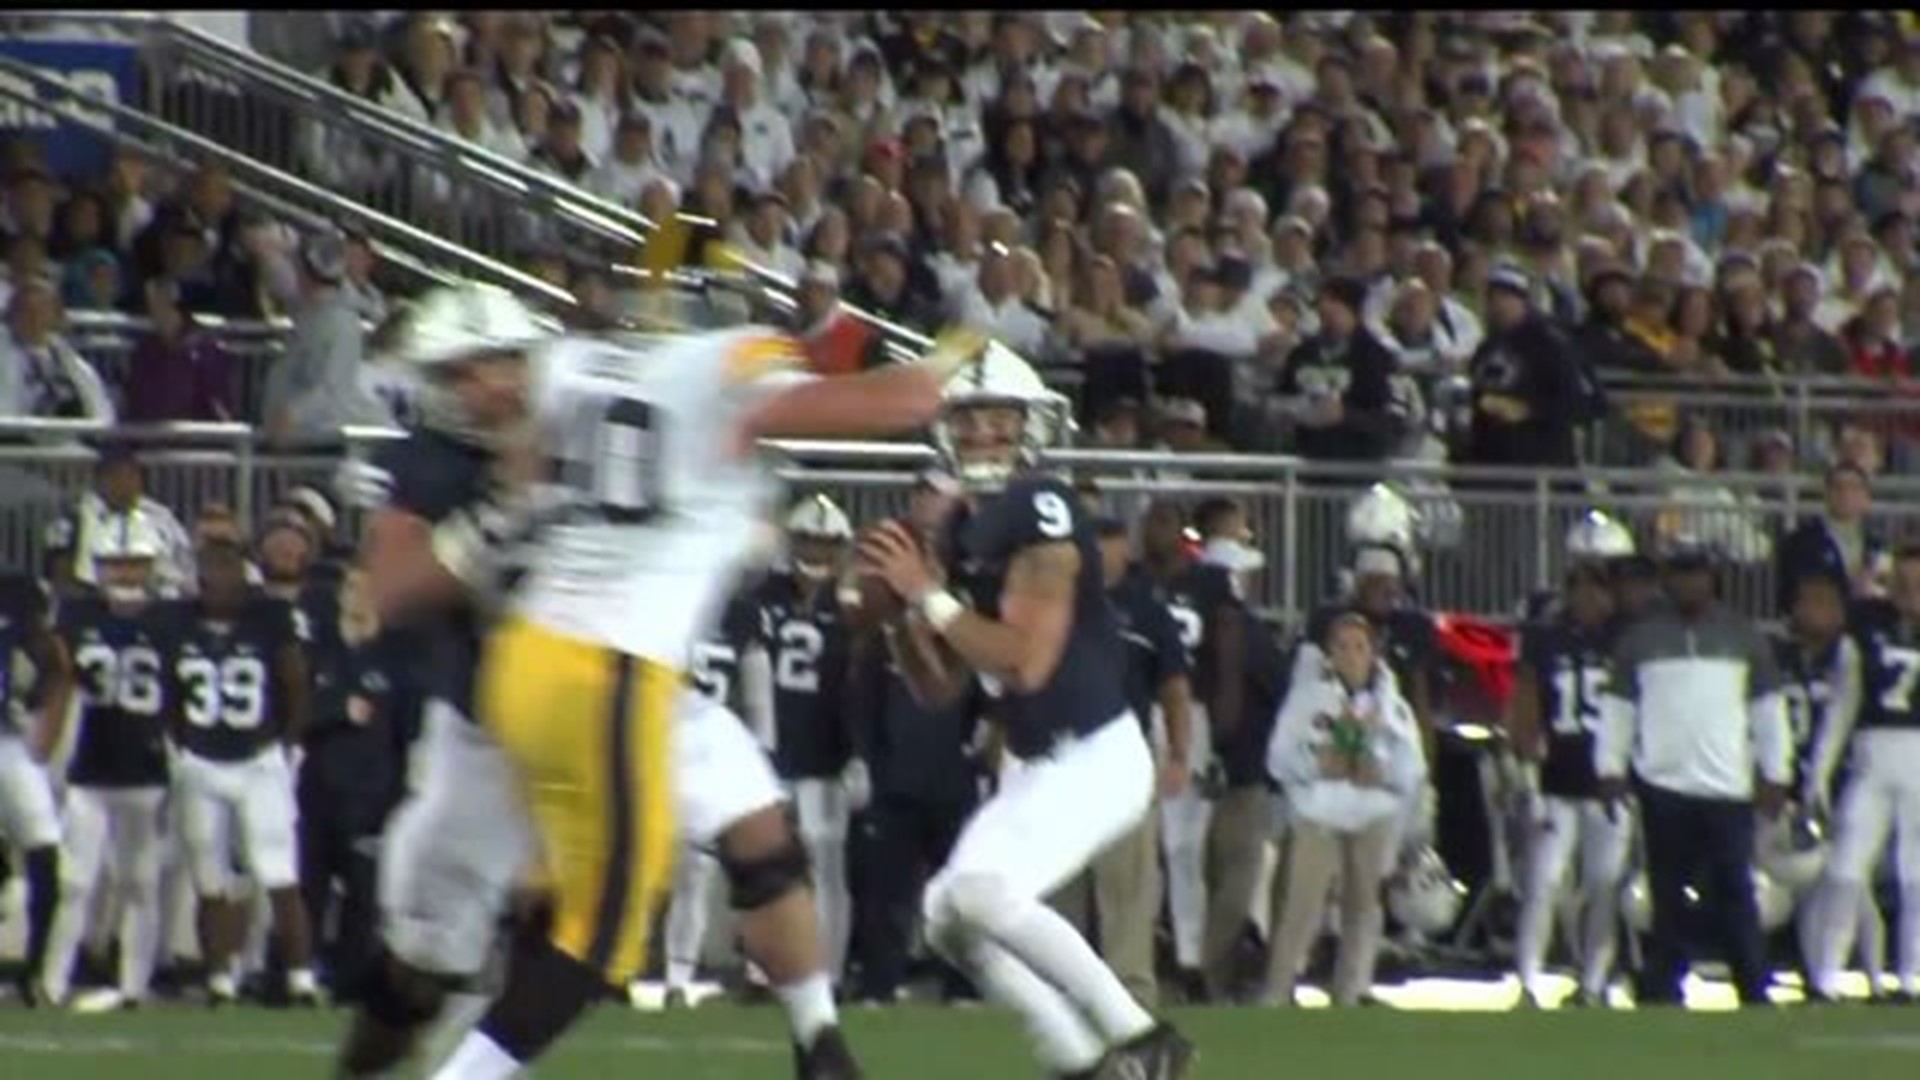 Penn State preps for Rose Bowl without suspended players